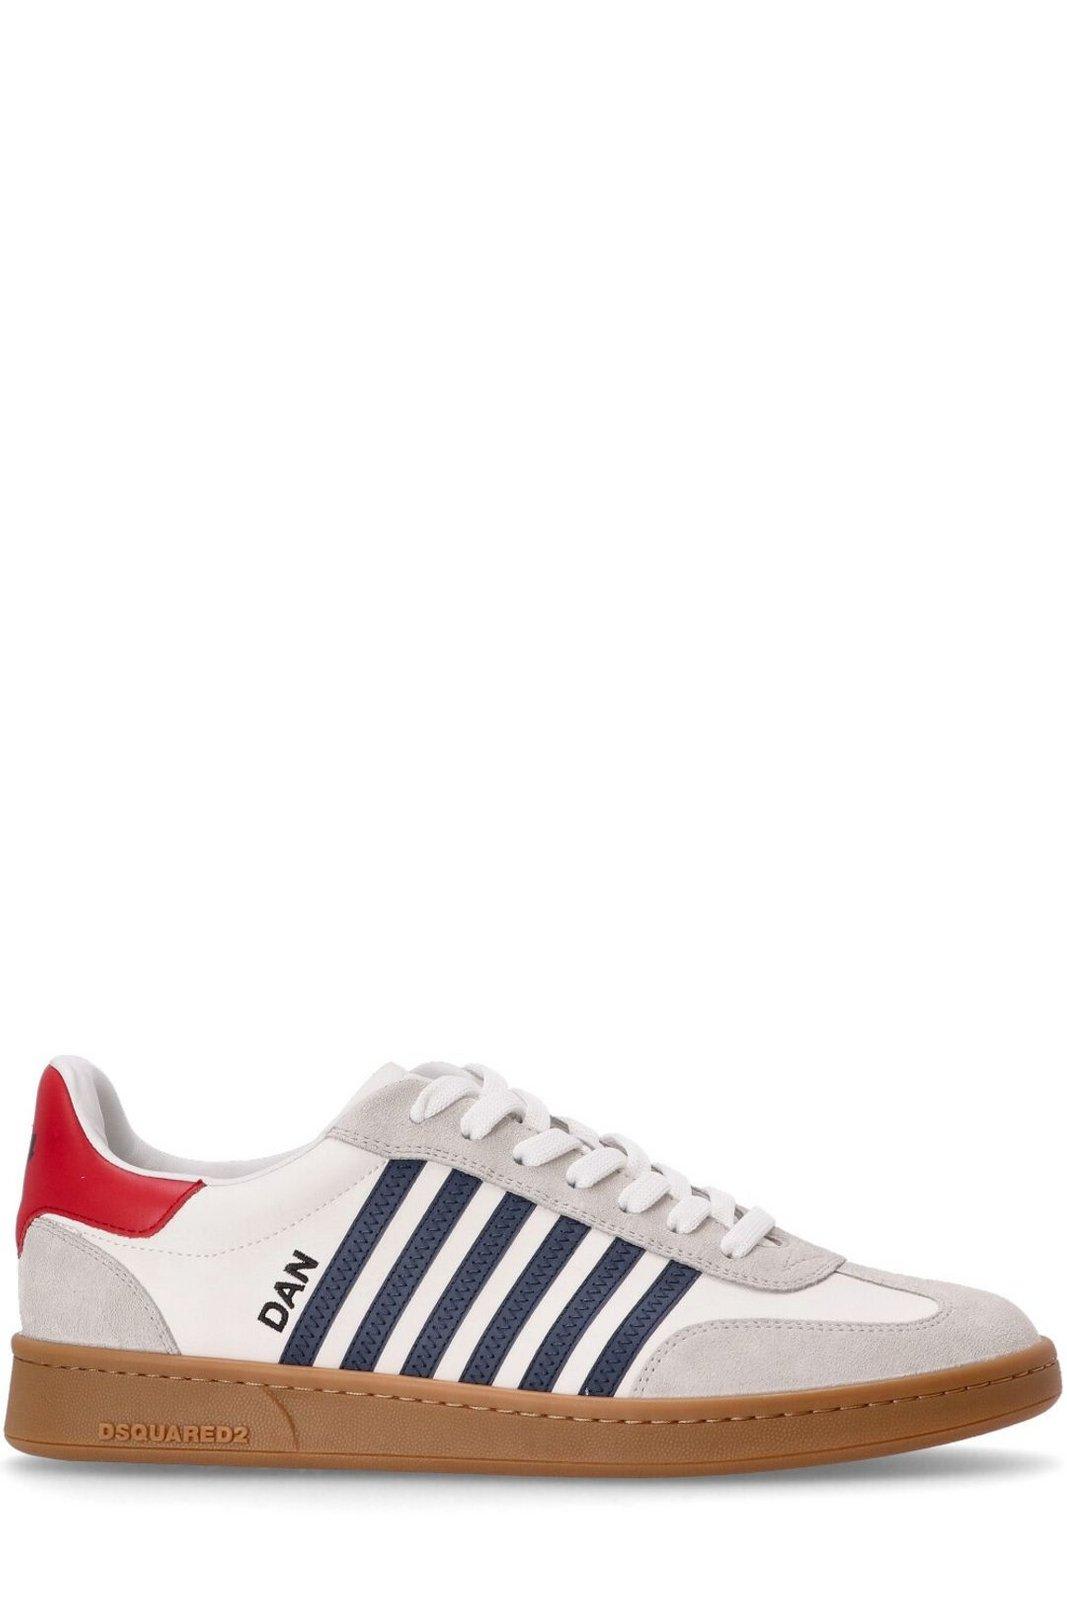 Shop Dsquared2 Round Toe Low-top Sneakers In White Blue Red